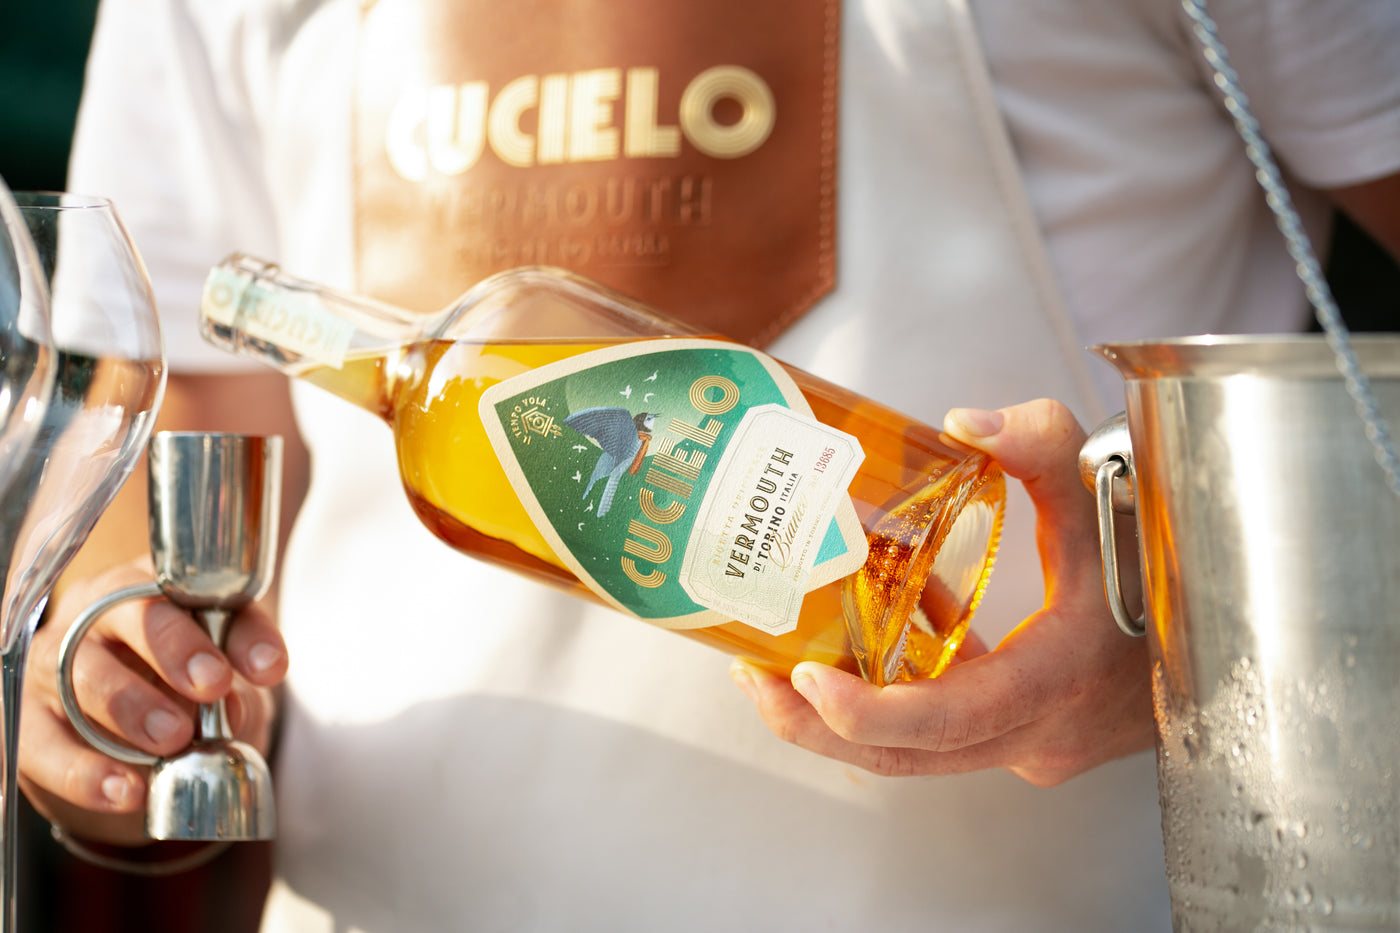 Cucielo. Born in the rolling hills of Italy’s Piemonte region, our Cucielo collection of Vermouths;  ROSSO & BIANCO VERMOUTH DI TORINO are simply perfect in a chilled, refreshing Aperitif or a luxurious cocktail.